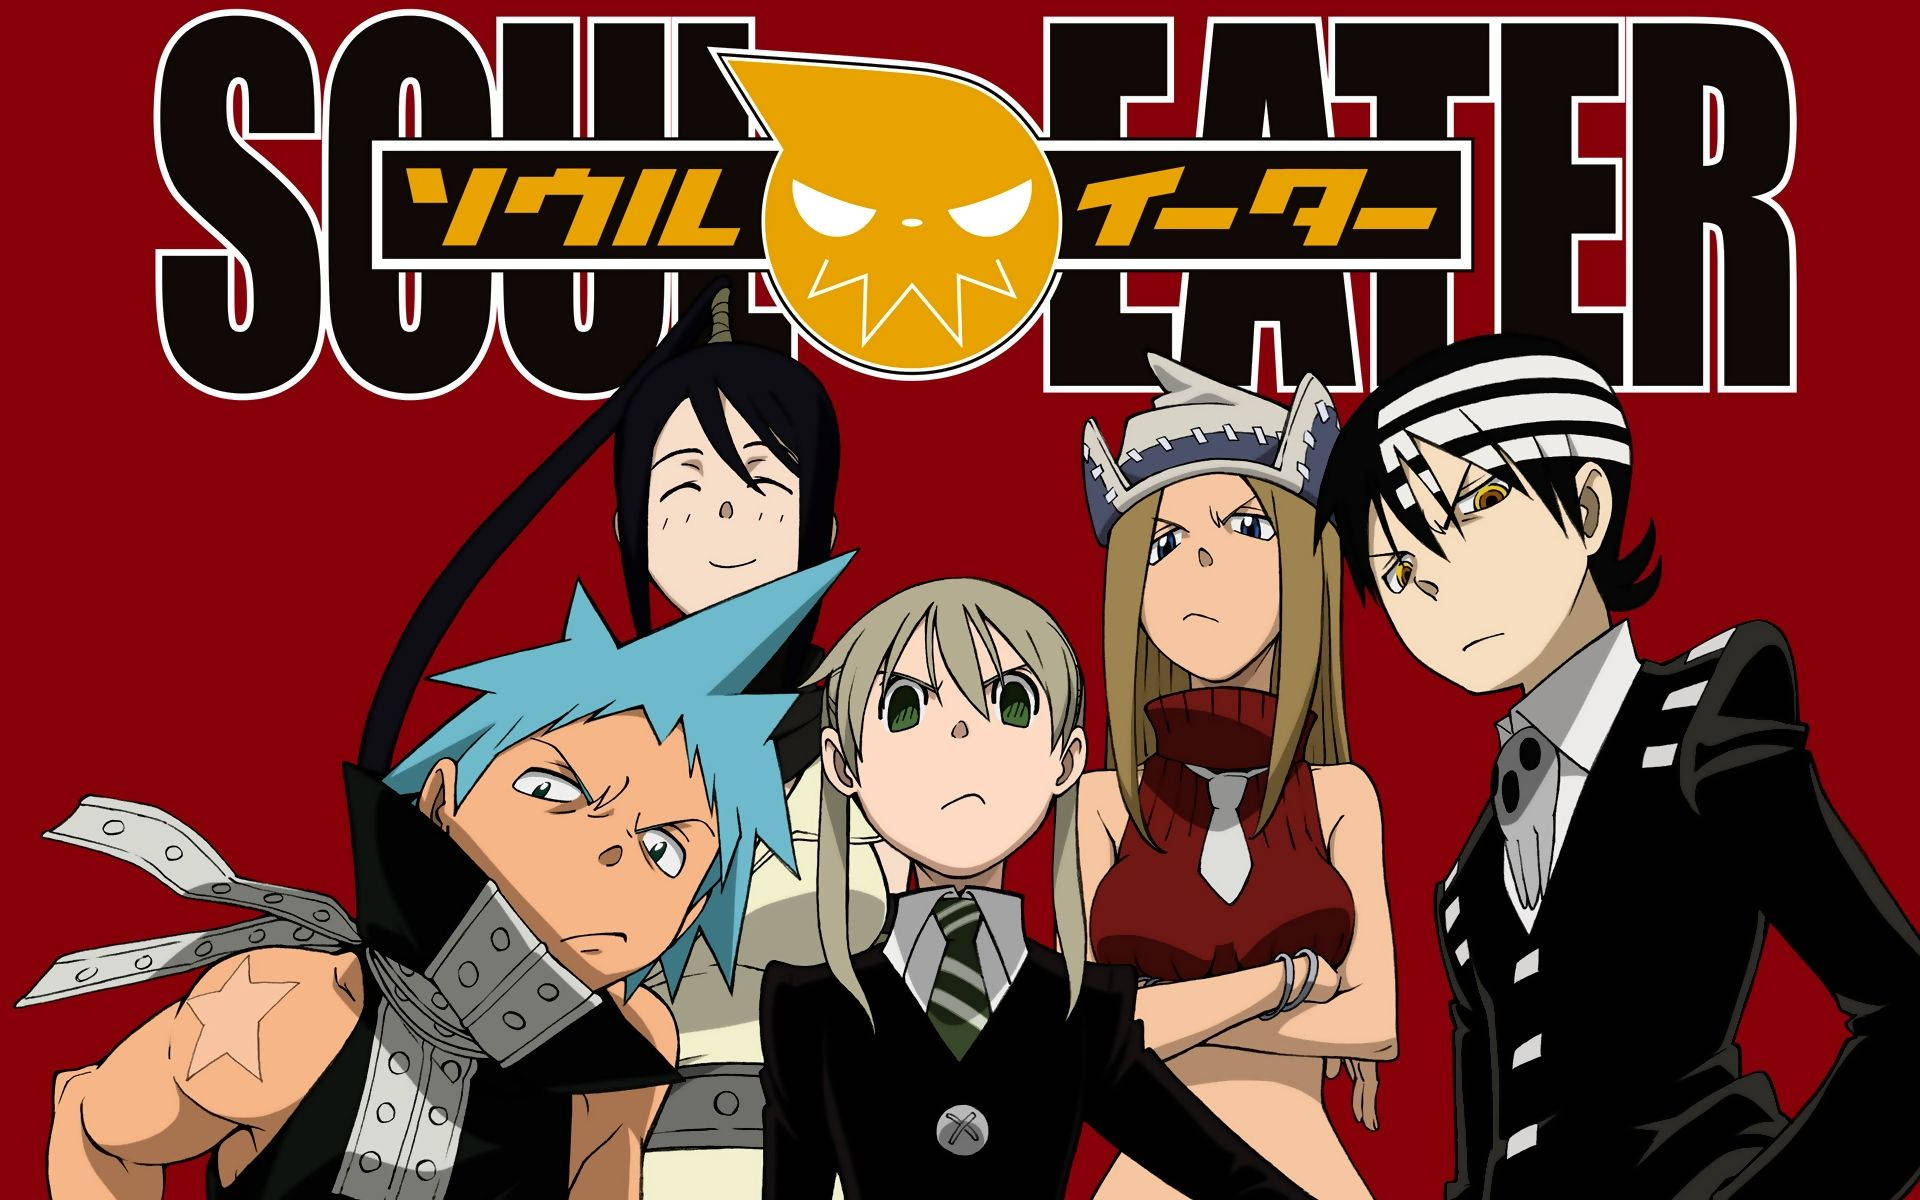 Free Soul Eater Wallpaper Downloads, [100+] Soul Eater Wallpapers for FREE  